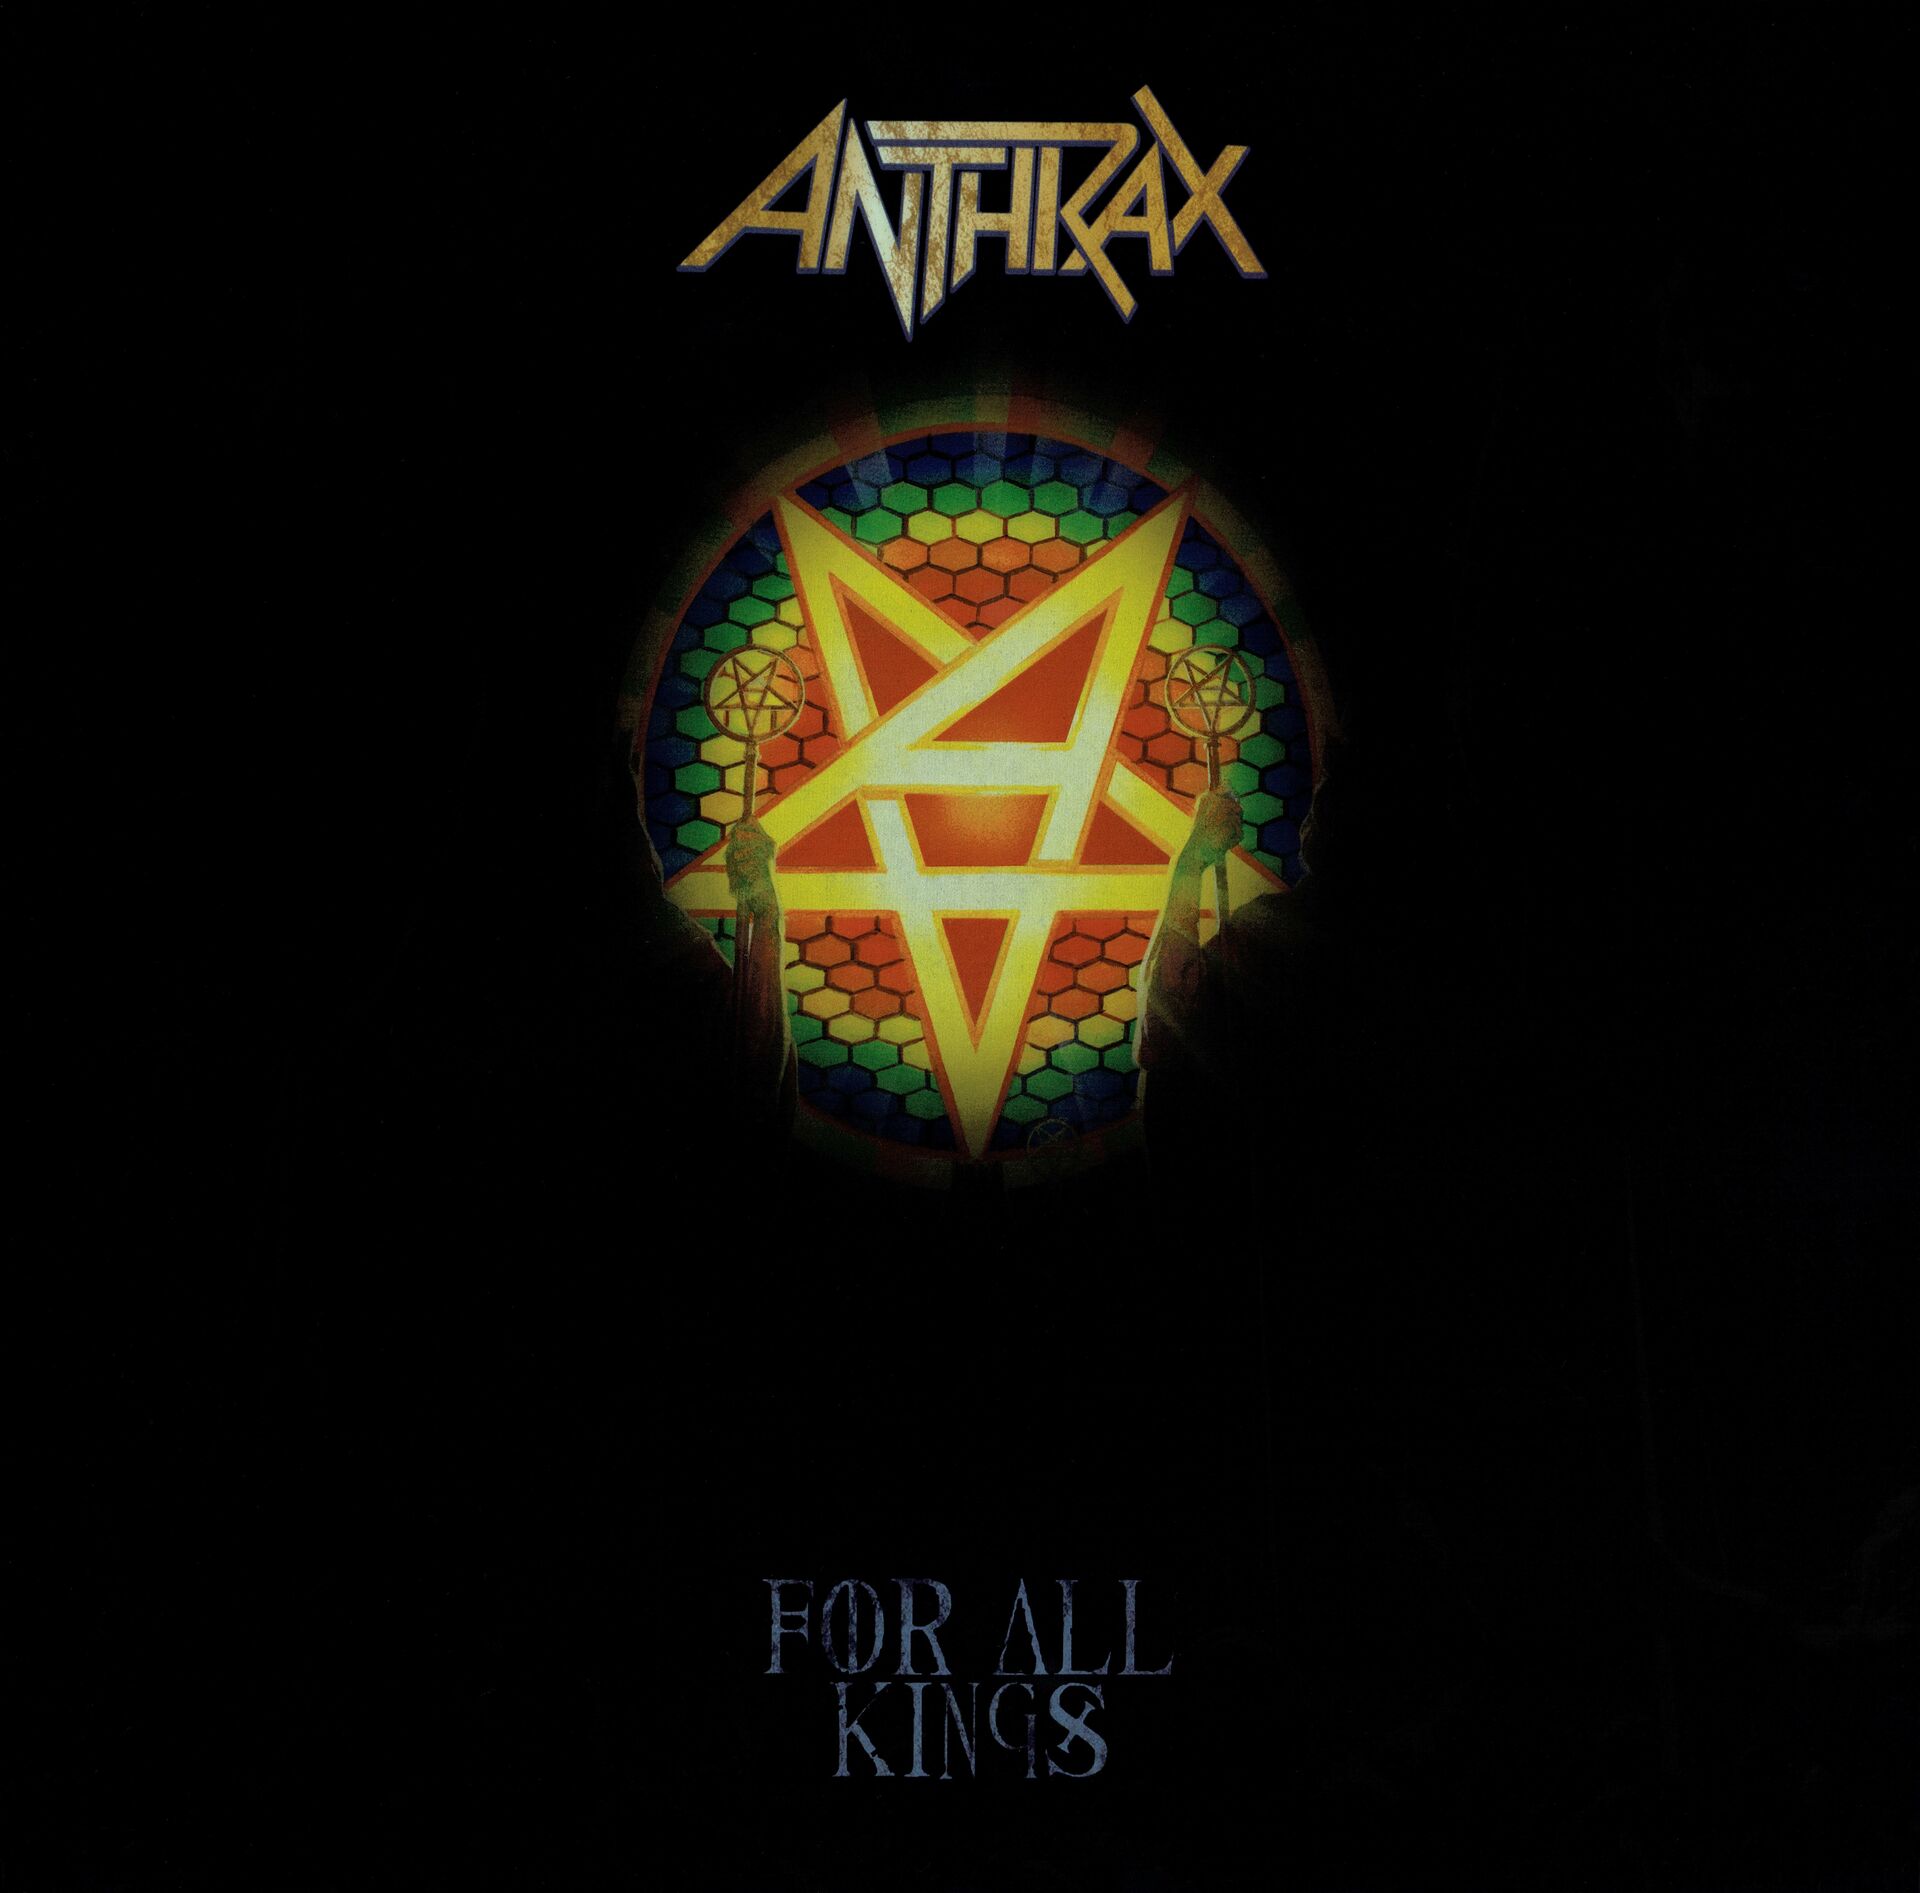 Anthrax - For All Kings-Outer sleeve.jpg